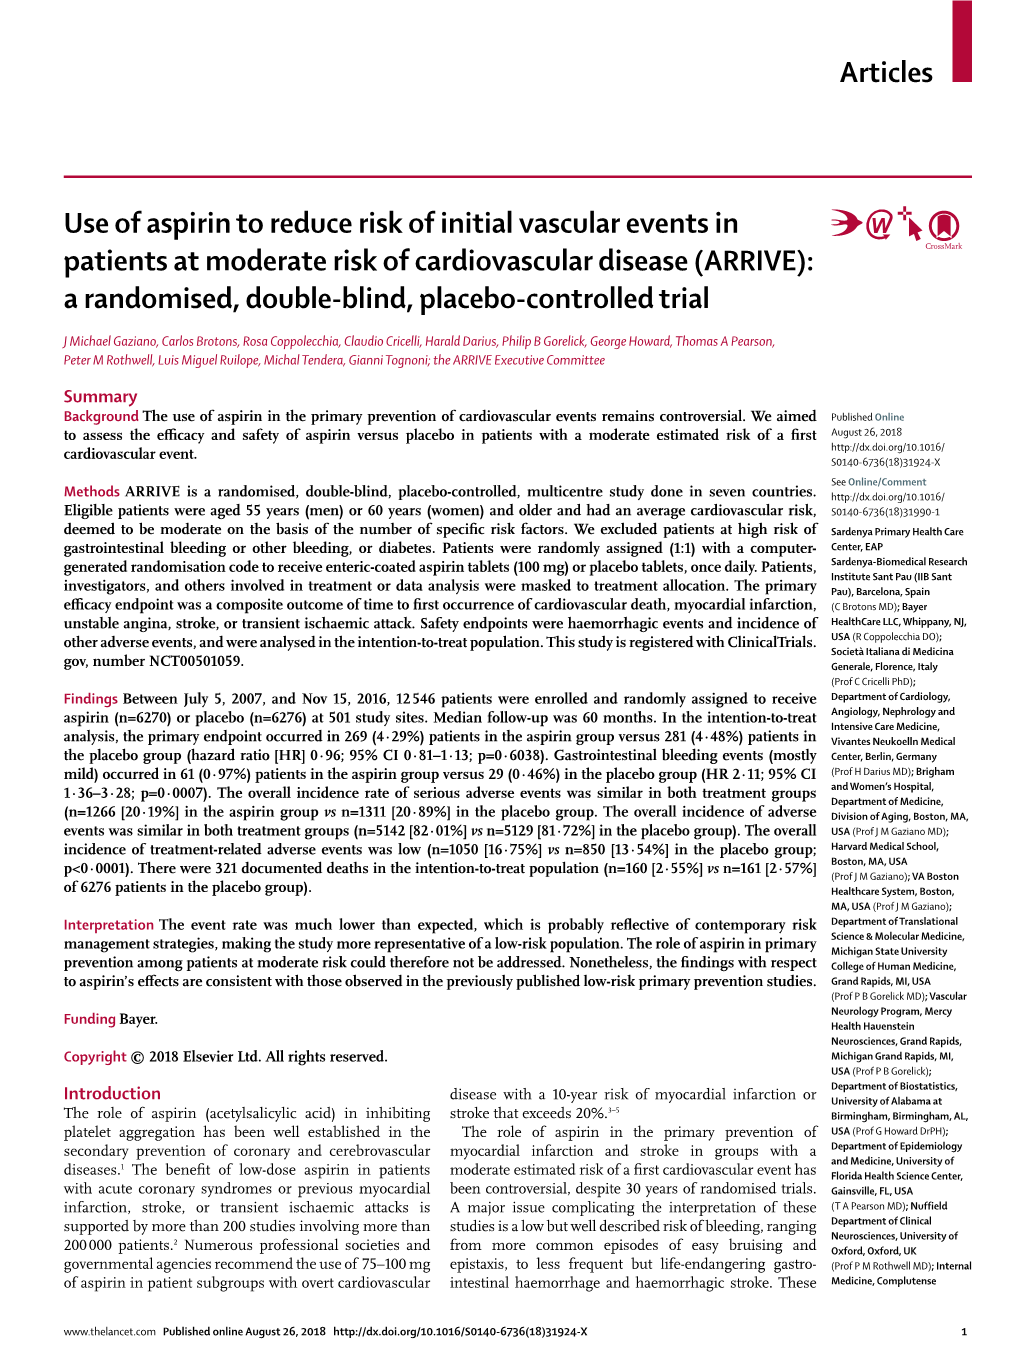 Use of Aspirin to Reduce Risk of Initial Vascular Events in Patients